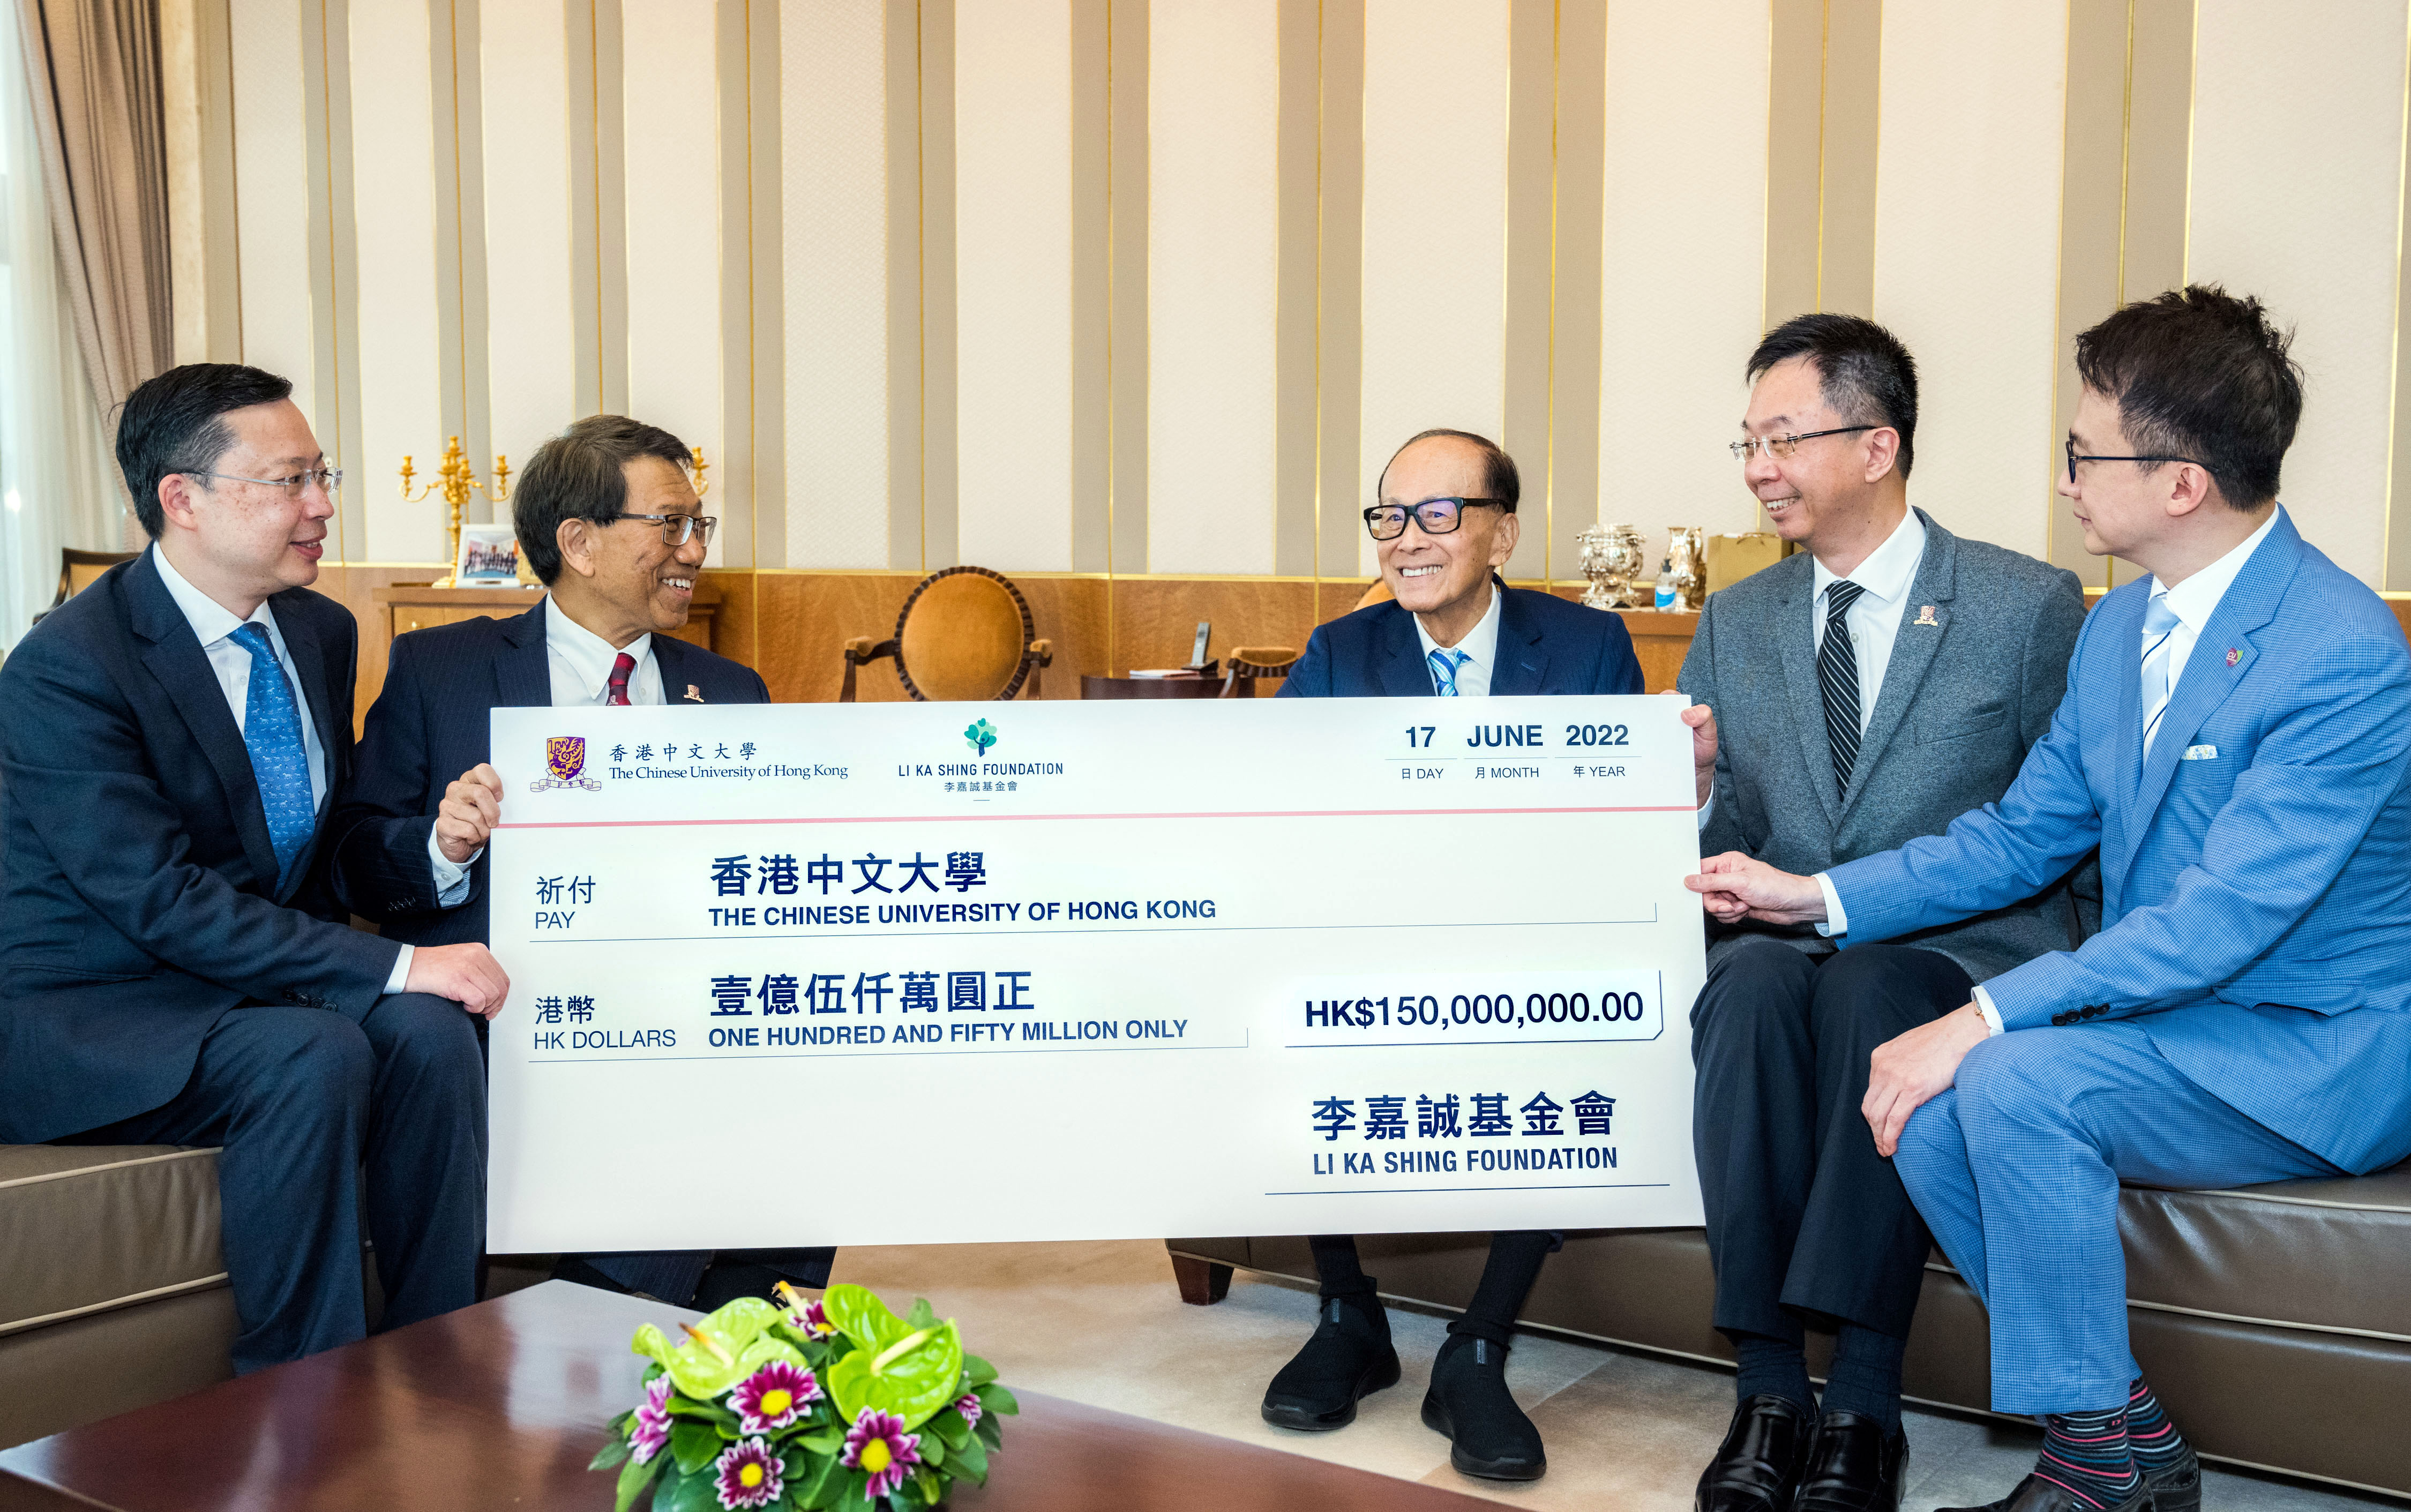 CUHK representatives thank Dr. Li Ka-shing (middle) for his generous donation to support the University’s research and development in biomedical technology